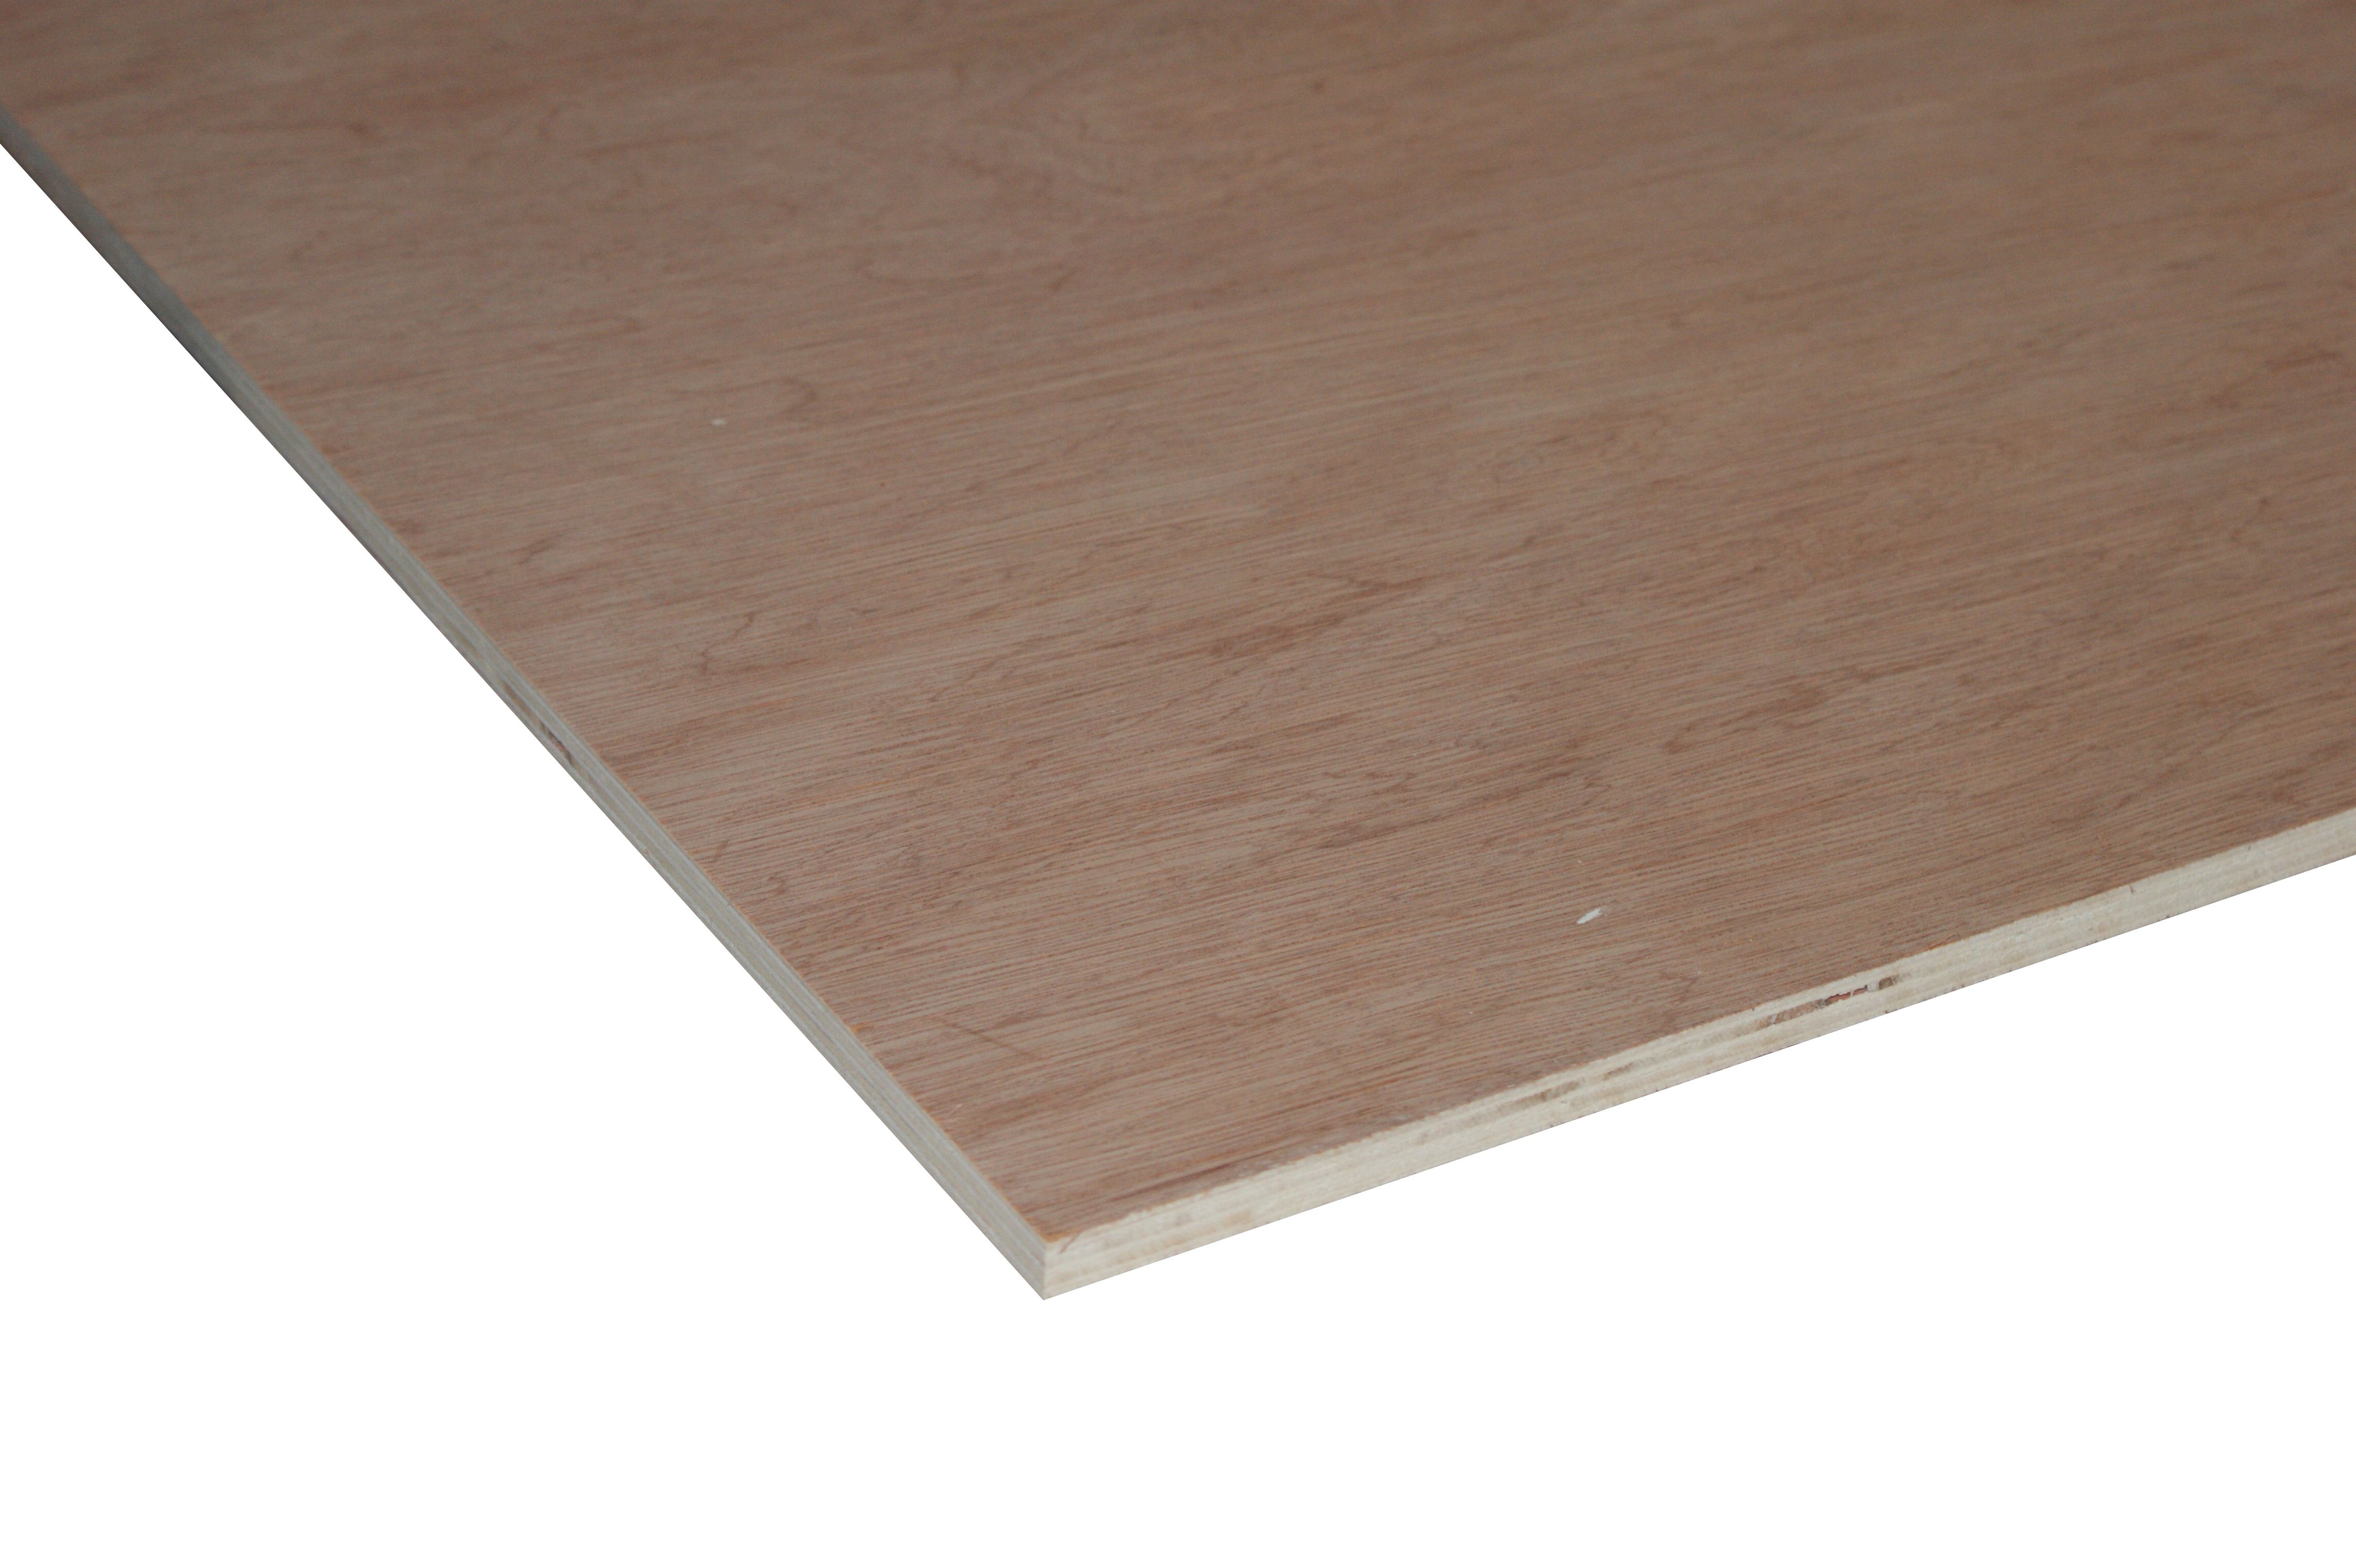 Non-Structural Hardwood Plywood Sheet - 3.6 x 607 x 1829mm